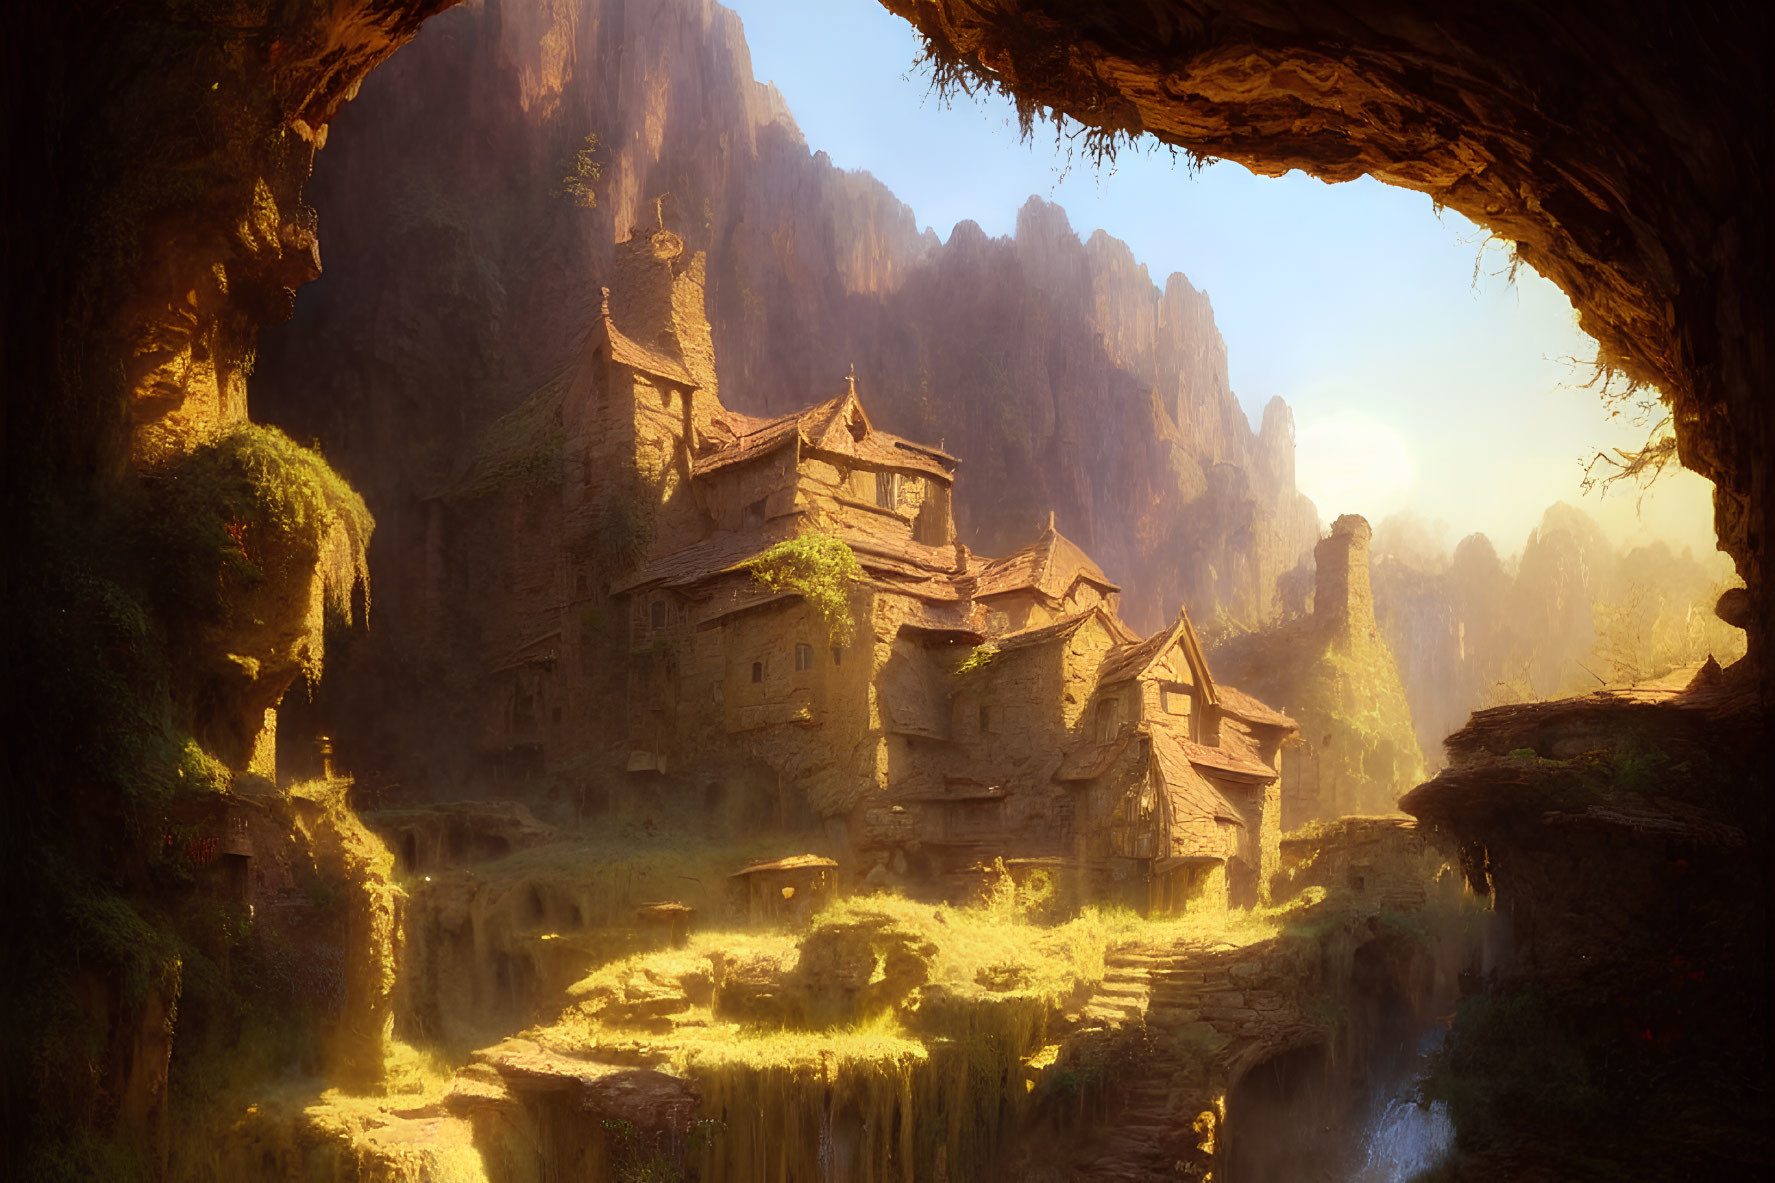 Rustic houses and lush greenery in sunlit cave village